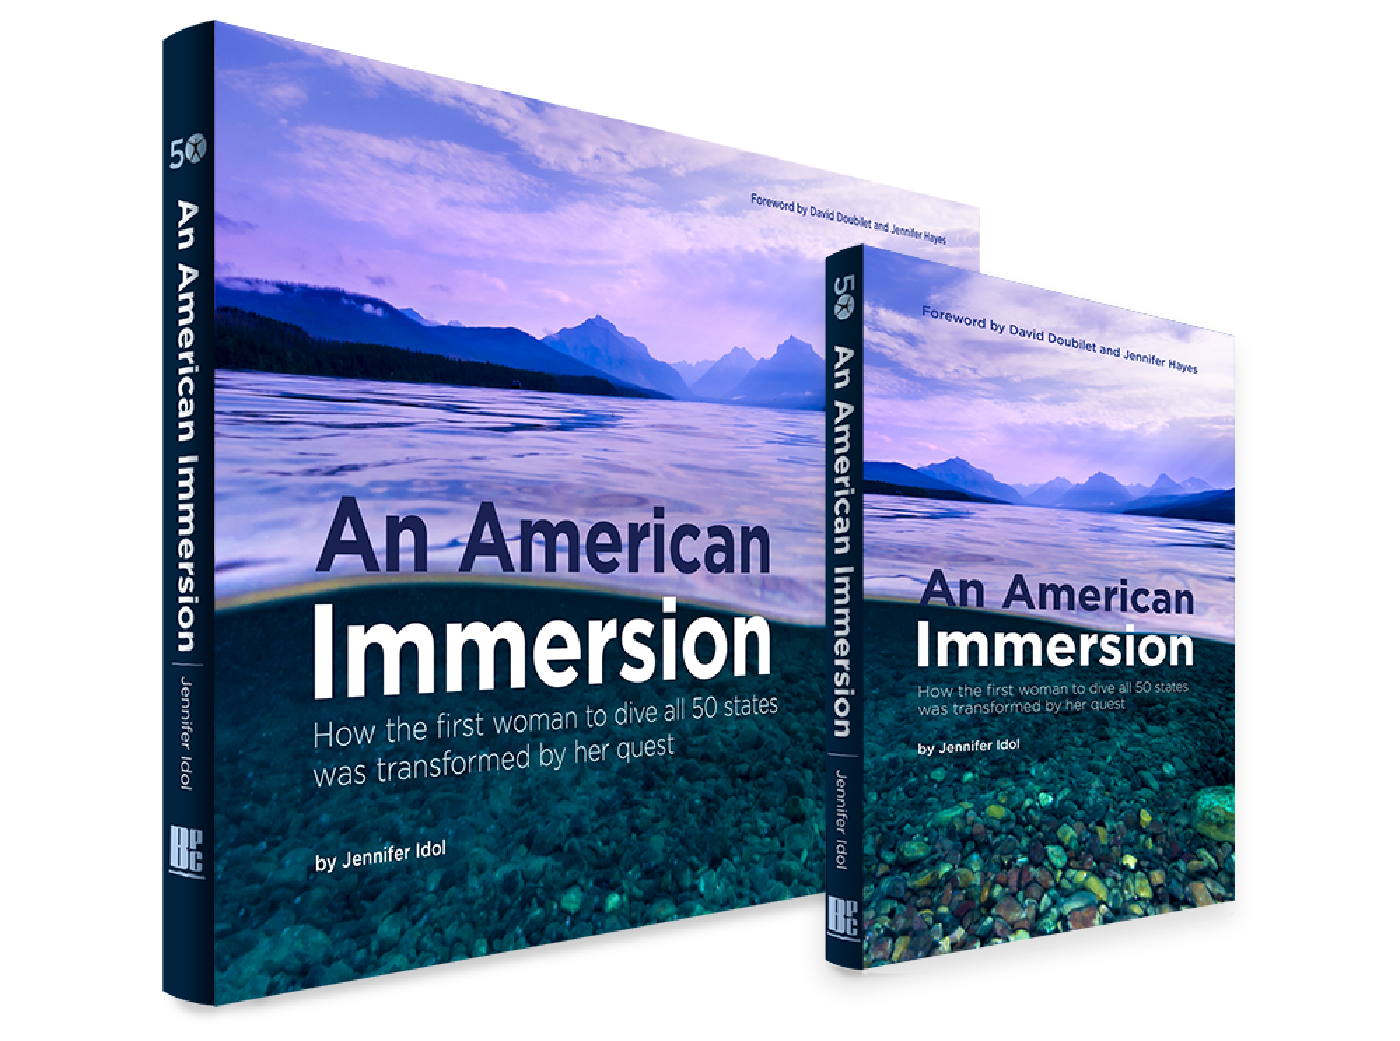 Softcover and Hardcover versions of An American Immersion